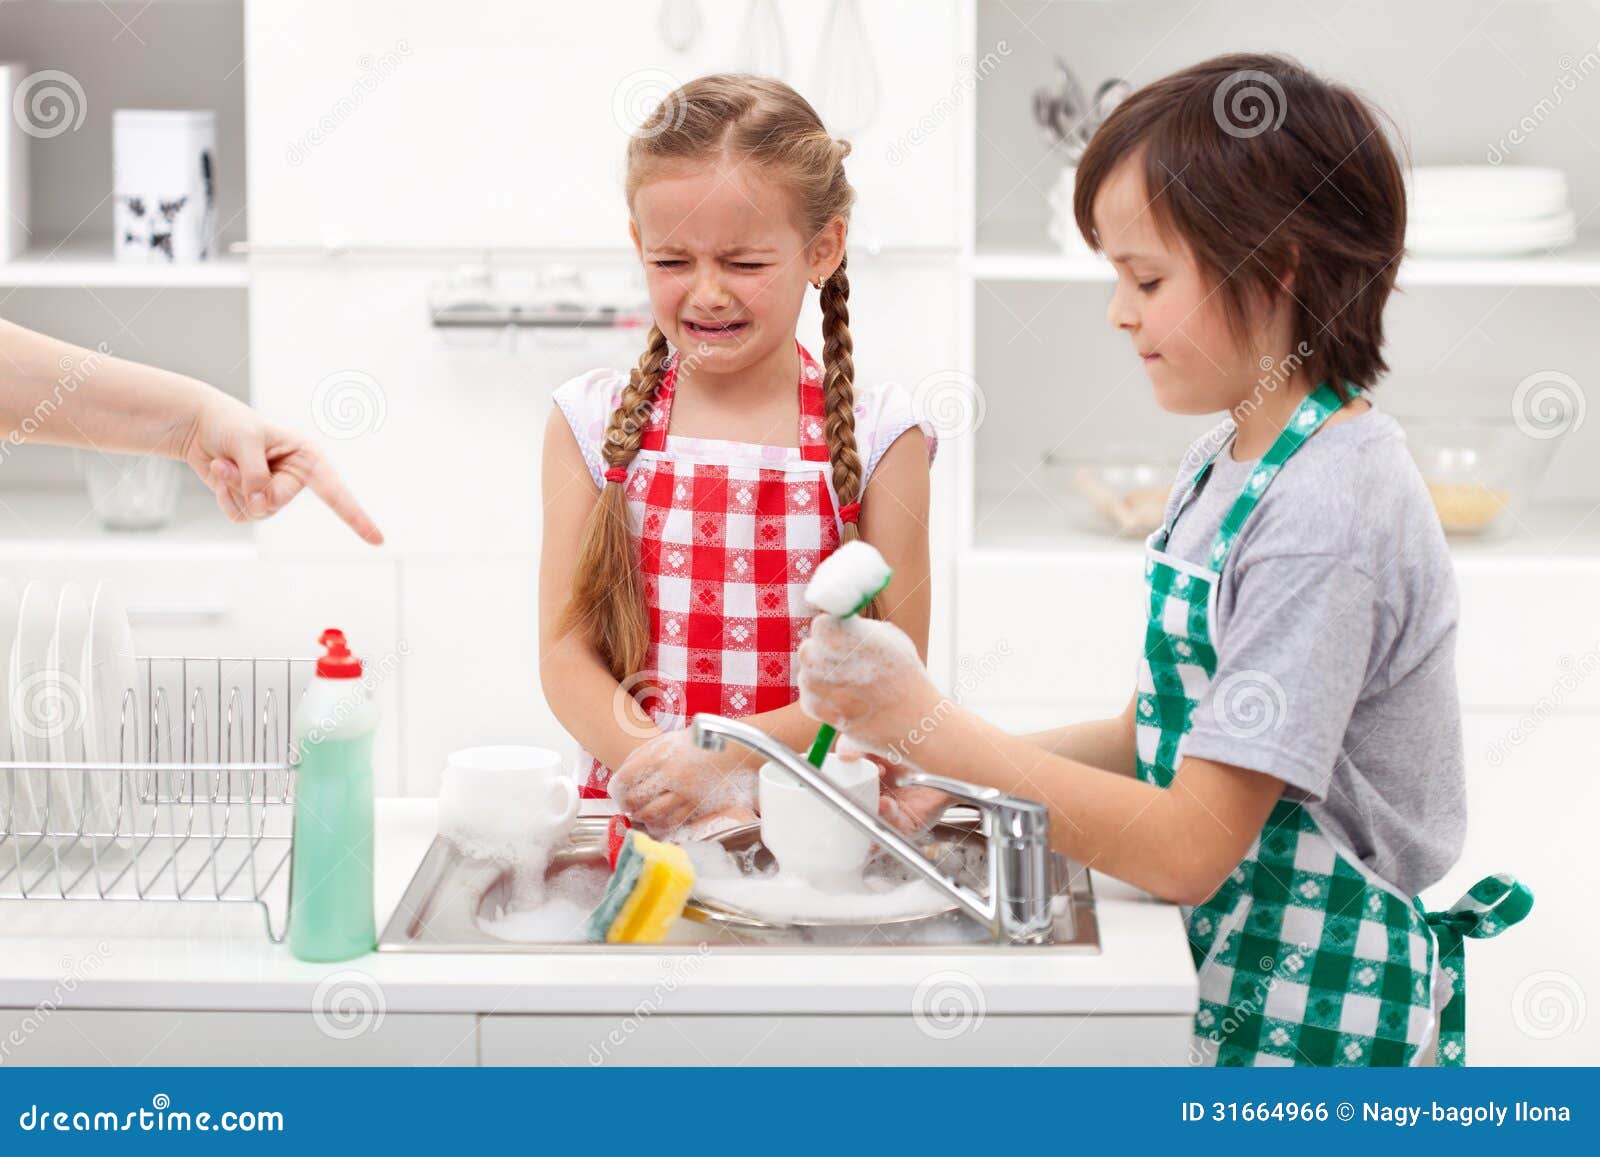 do the dishes - kids ordered to help in the kitchen